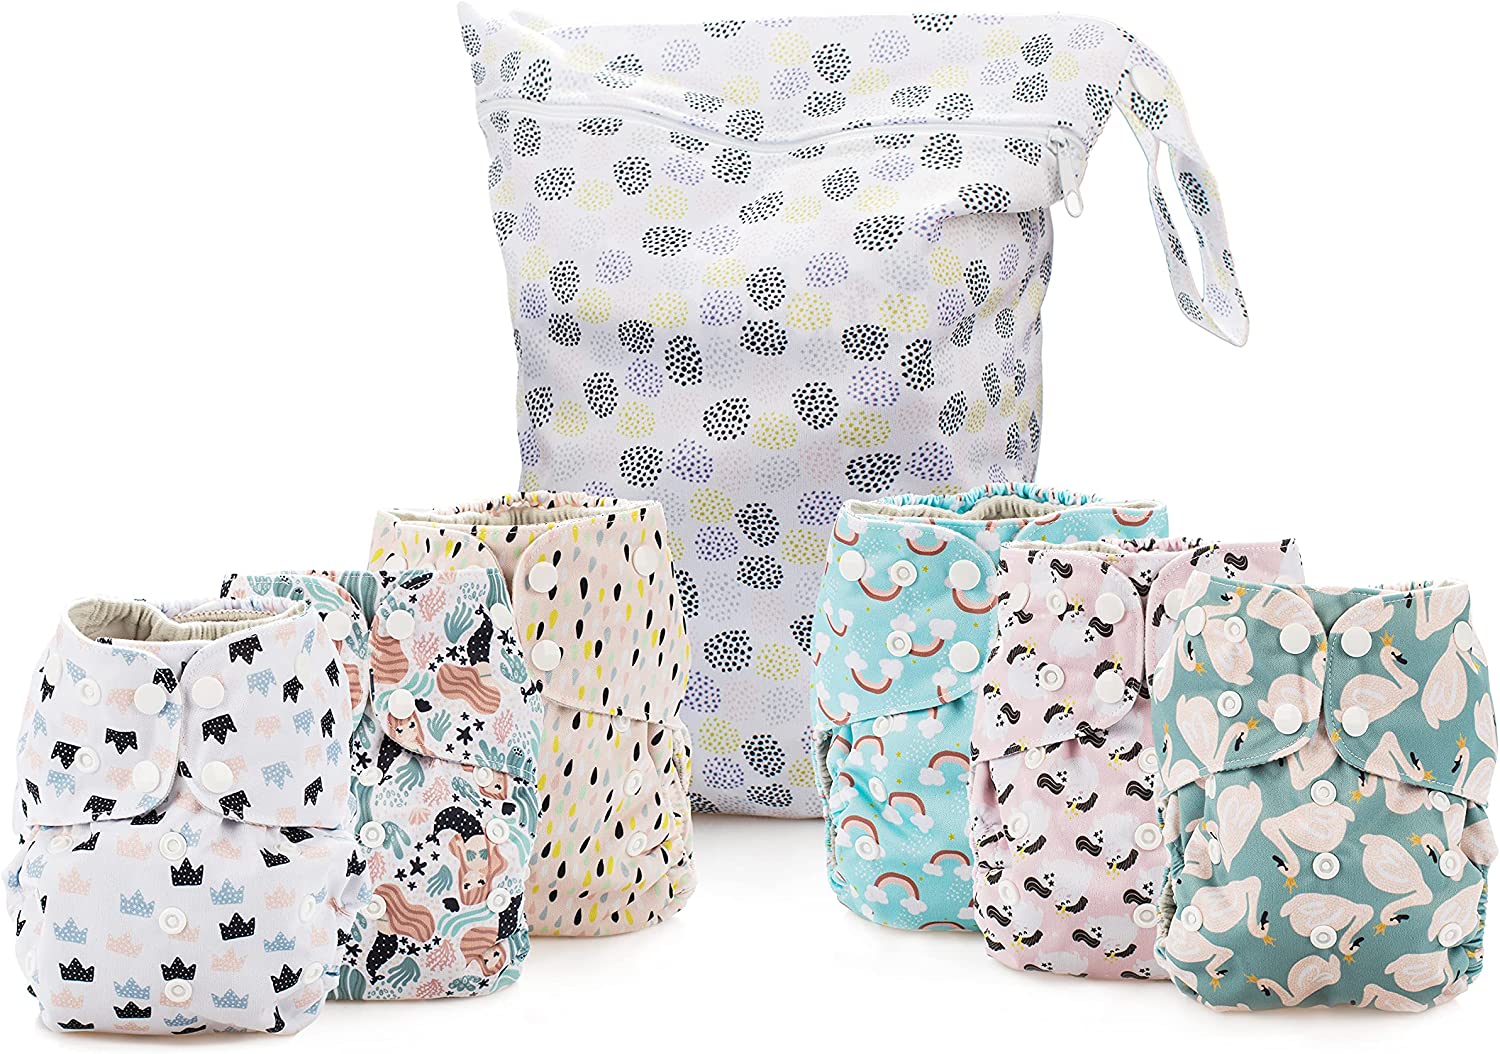 Simple Being Reusable Cloth Diapers- Double Gusset, One Size Adjustable, Washable Soft Absorbent, Waterproof Cover, Eco-Friendly Unisex Baby Girl Boy, six 4-Layers Microfiber Inserts (Whimsical)